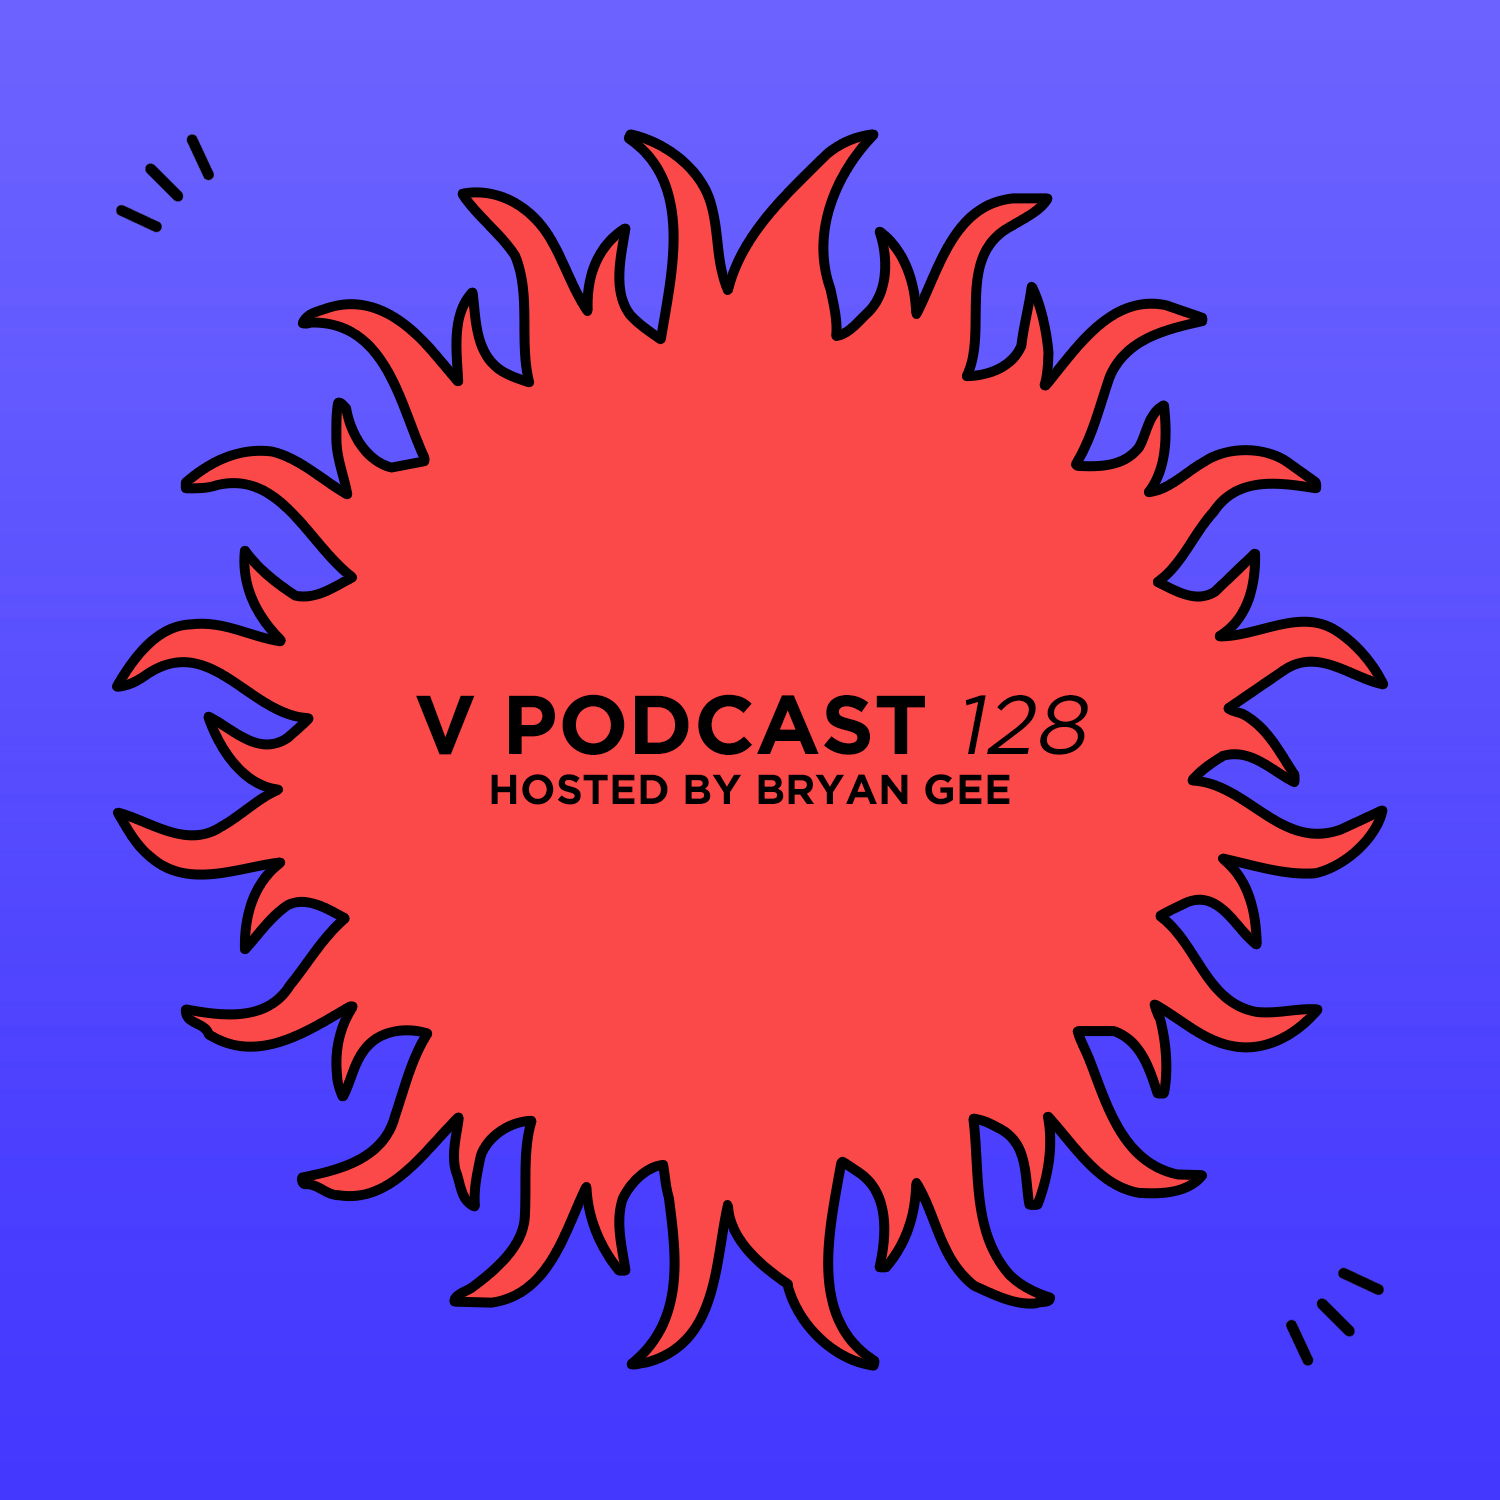 V Podcast 128 - Hosted by Bryan Gee Artwork